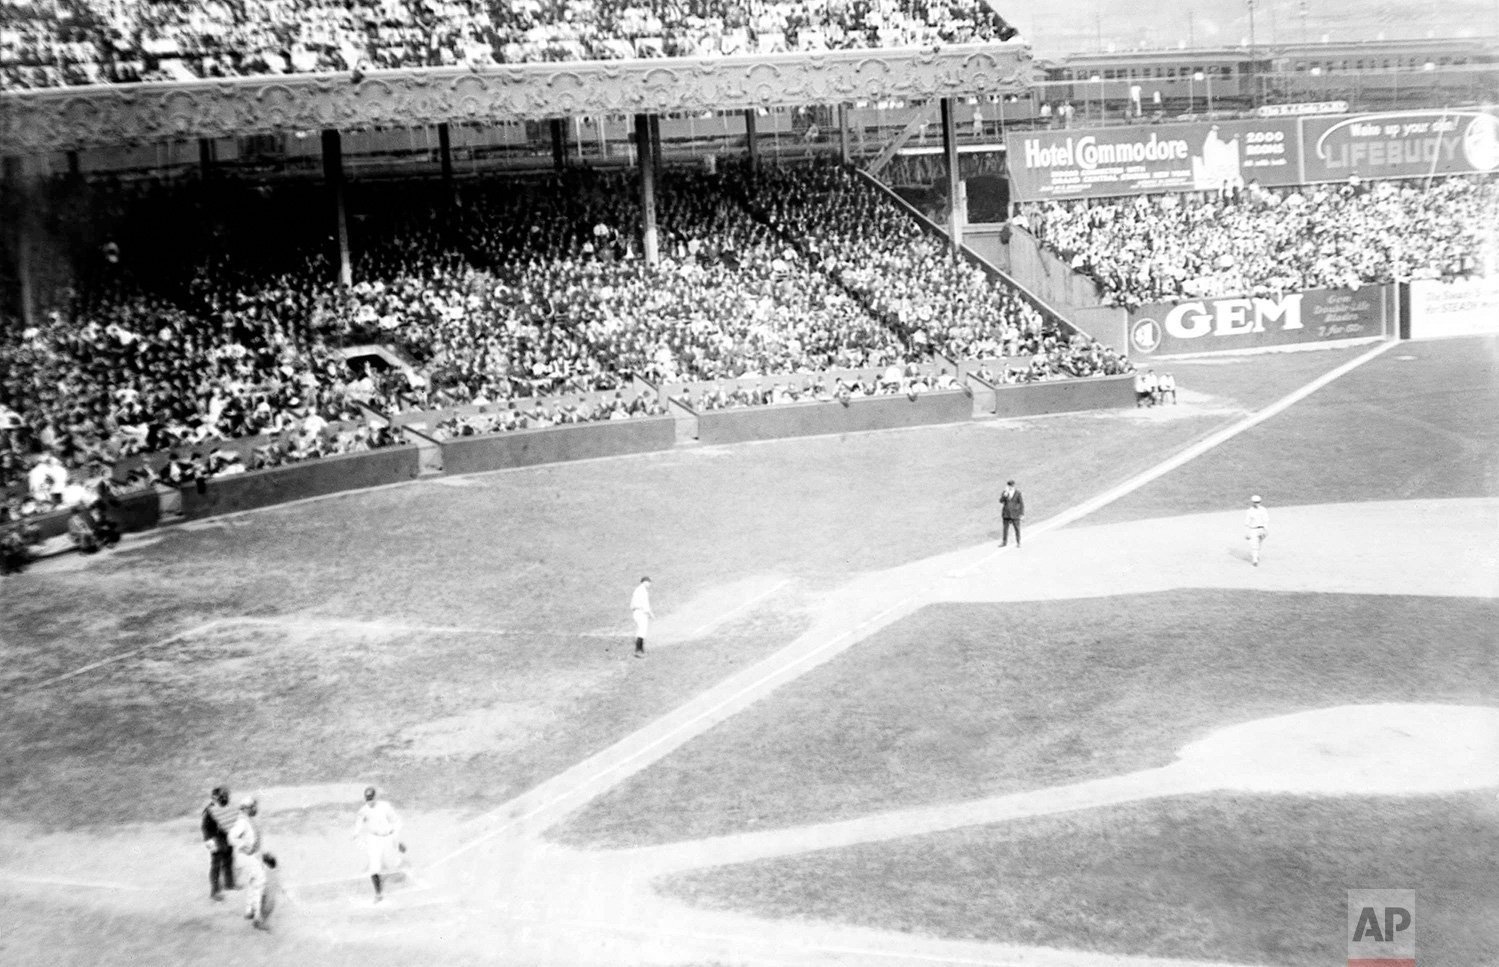  Jo Jo Dugan, scoring the Yankees first run of the second game of World Series, Oct. 5, 1922, on Wally Pipp's single to George Kelly in the first inning at the Polo Grounds in New York. (AP Photo) 